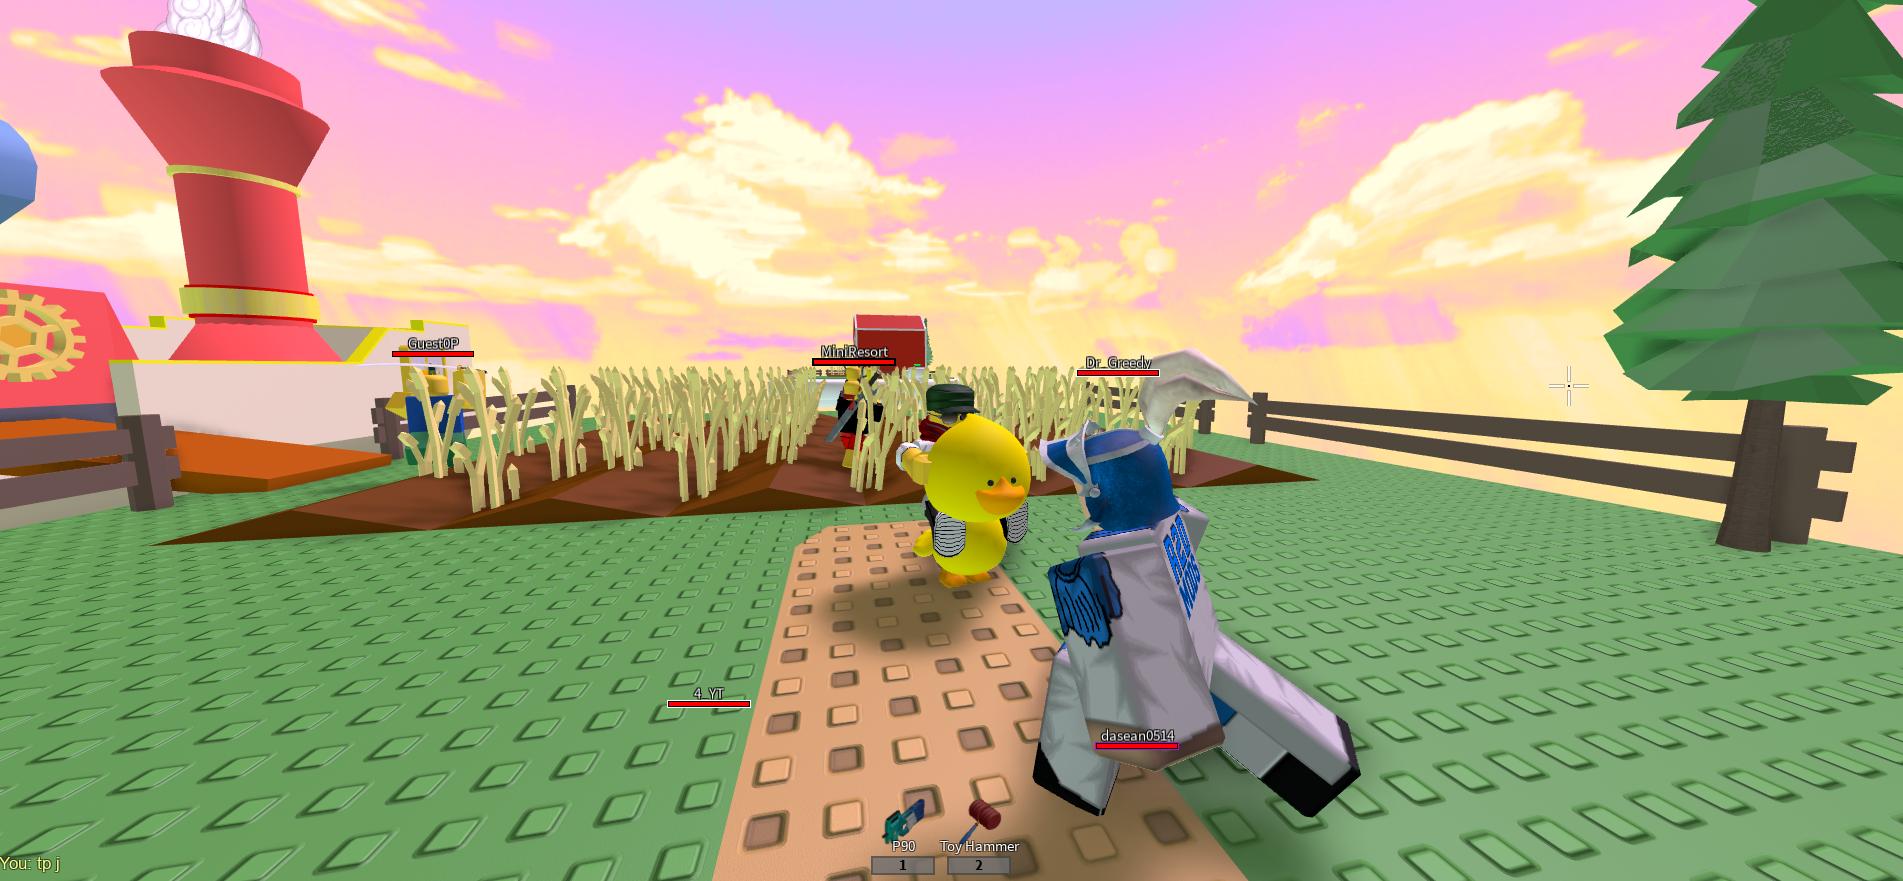 Placerebuilder On Twitter R2da Duck Event Has Begun Grab Yo Mom S Creditcard And Head Over To R2da Today Tons Of New Stuff Added You Don T Wana Miss This Https T Co 4jhcuyzqji Robloxdev Https T Co D0knulf9ur - roblox r2da ducky roblox gift card code get